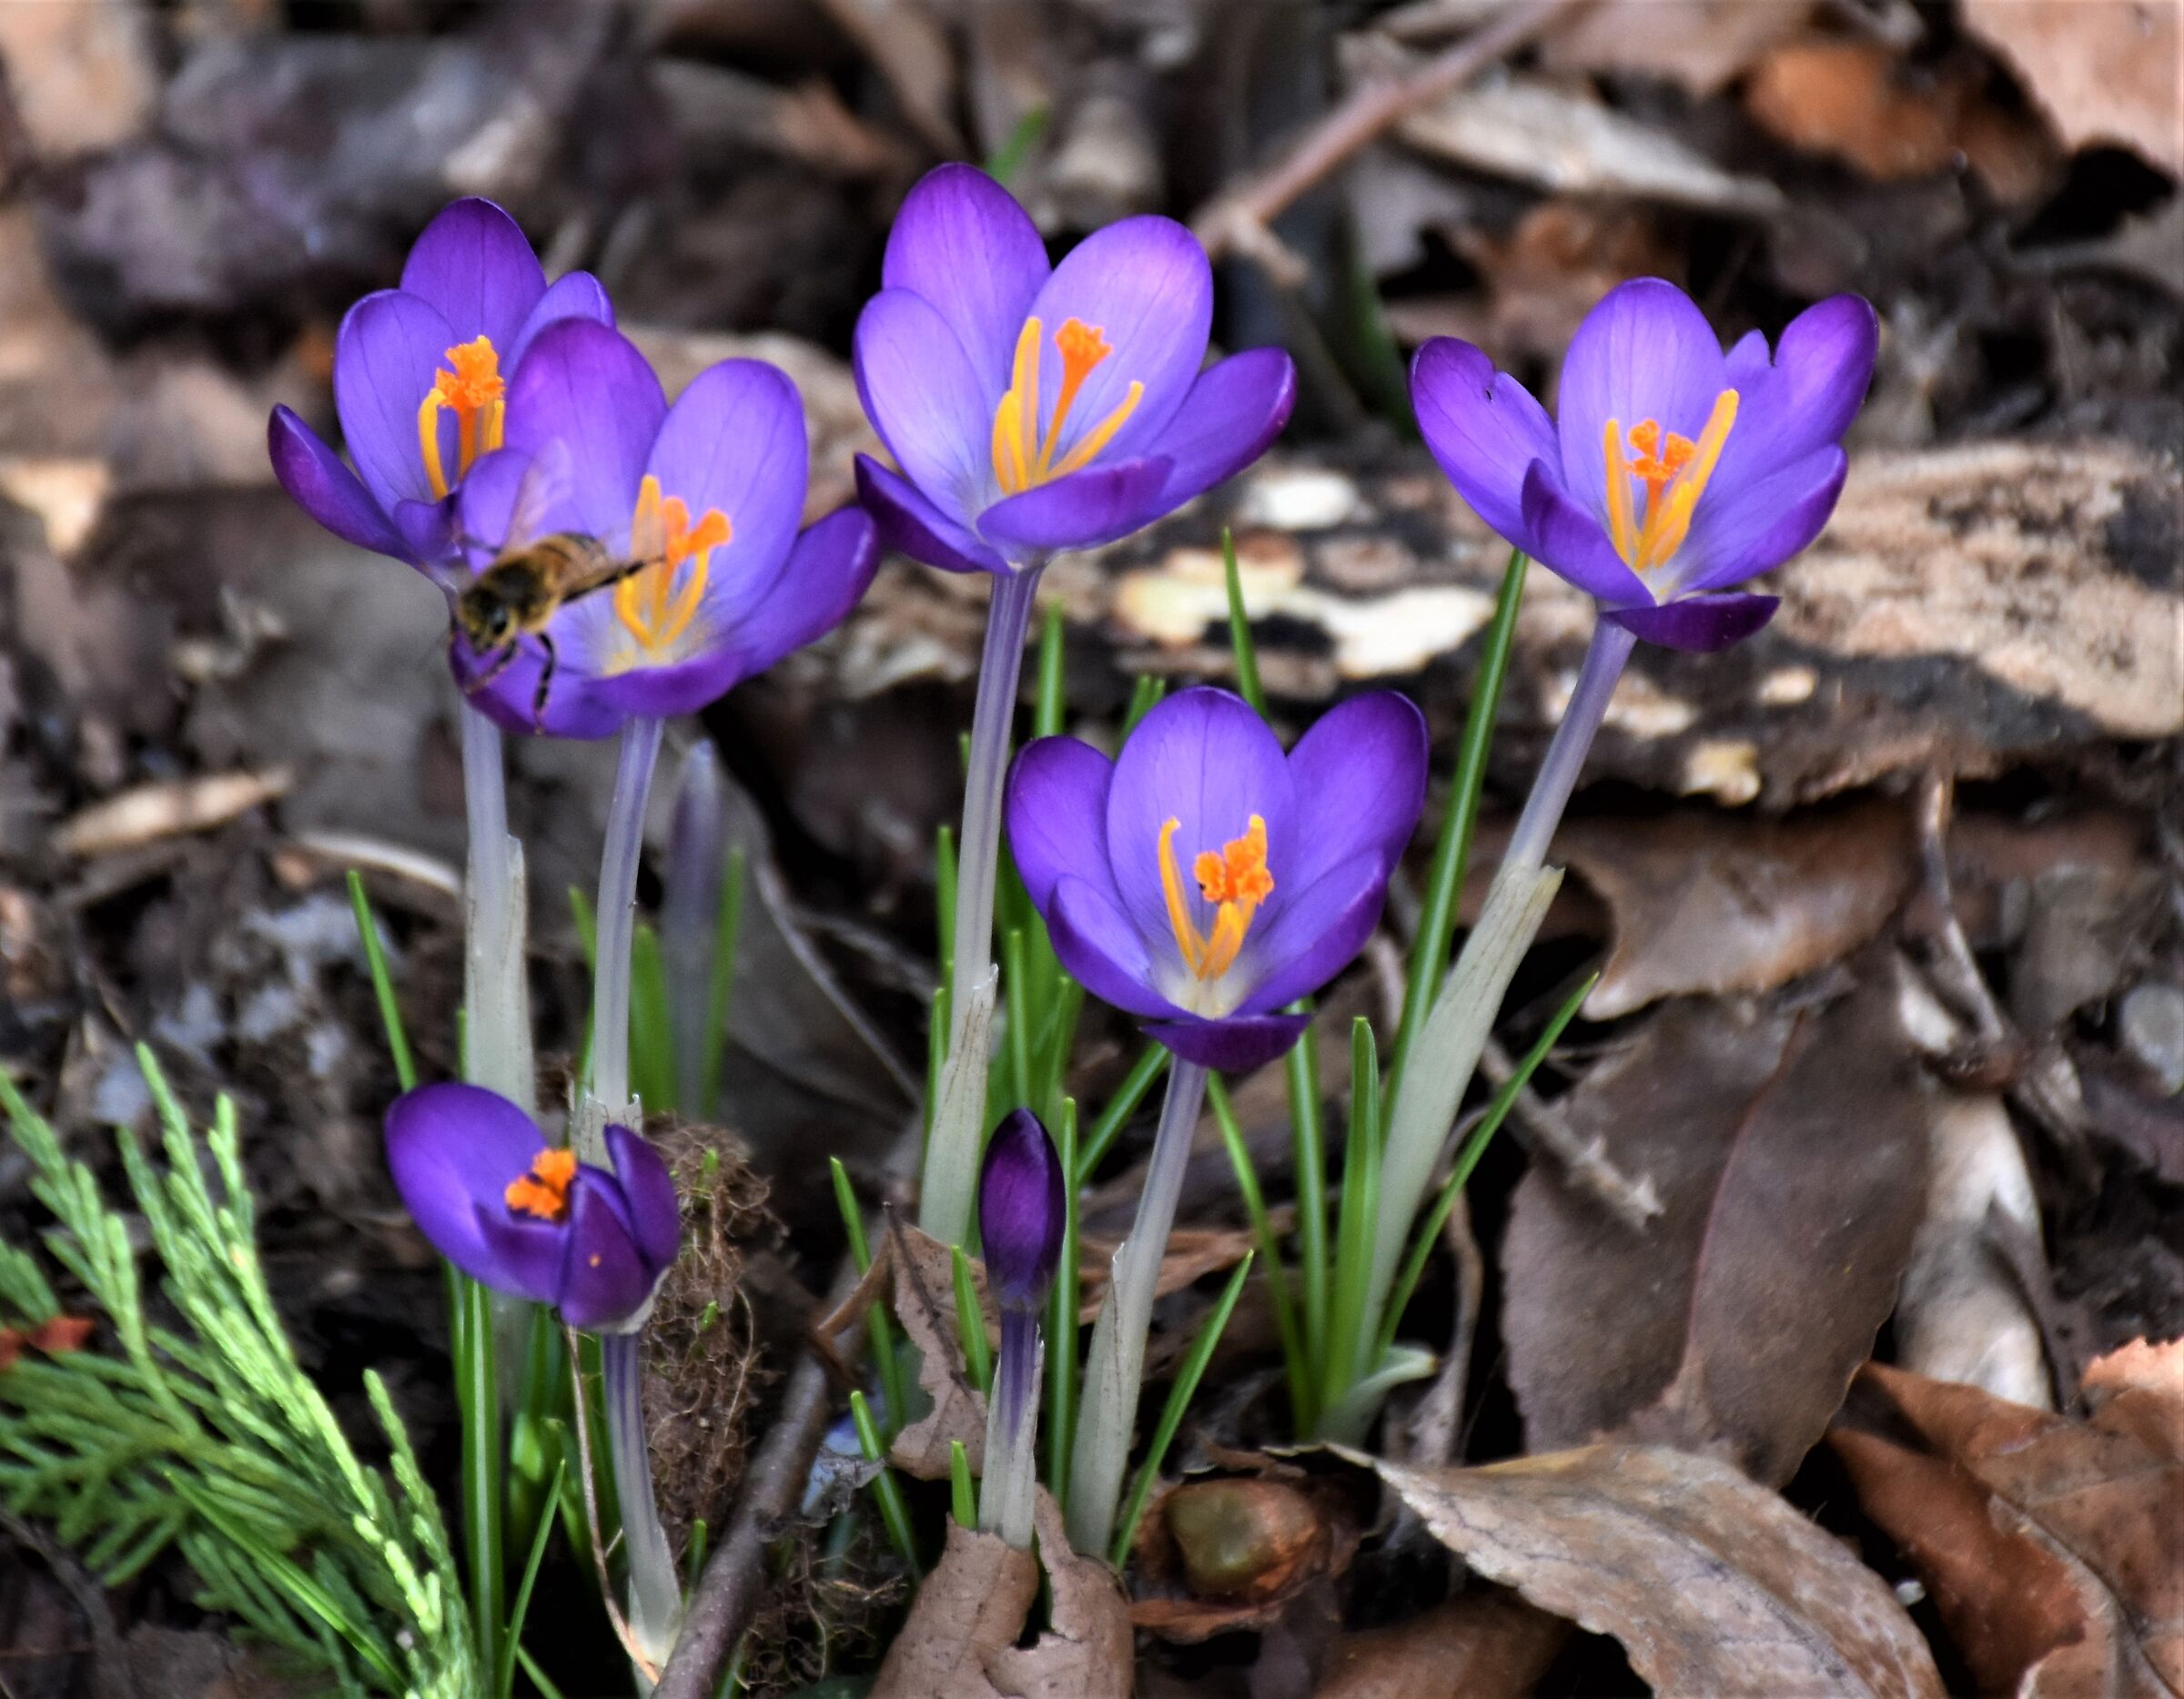 The first crocuses ...